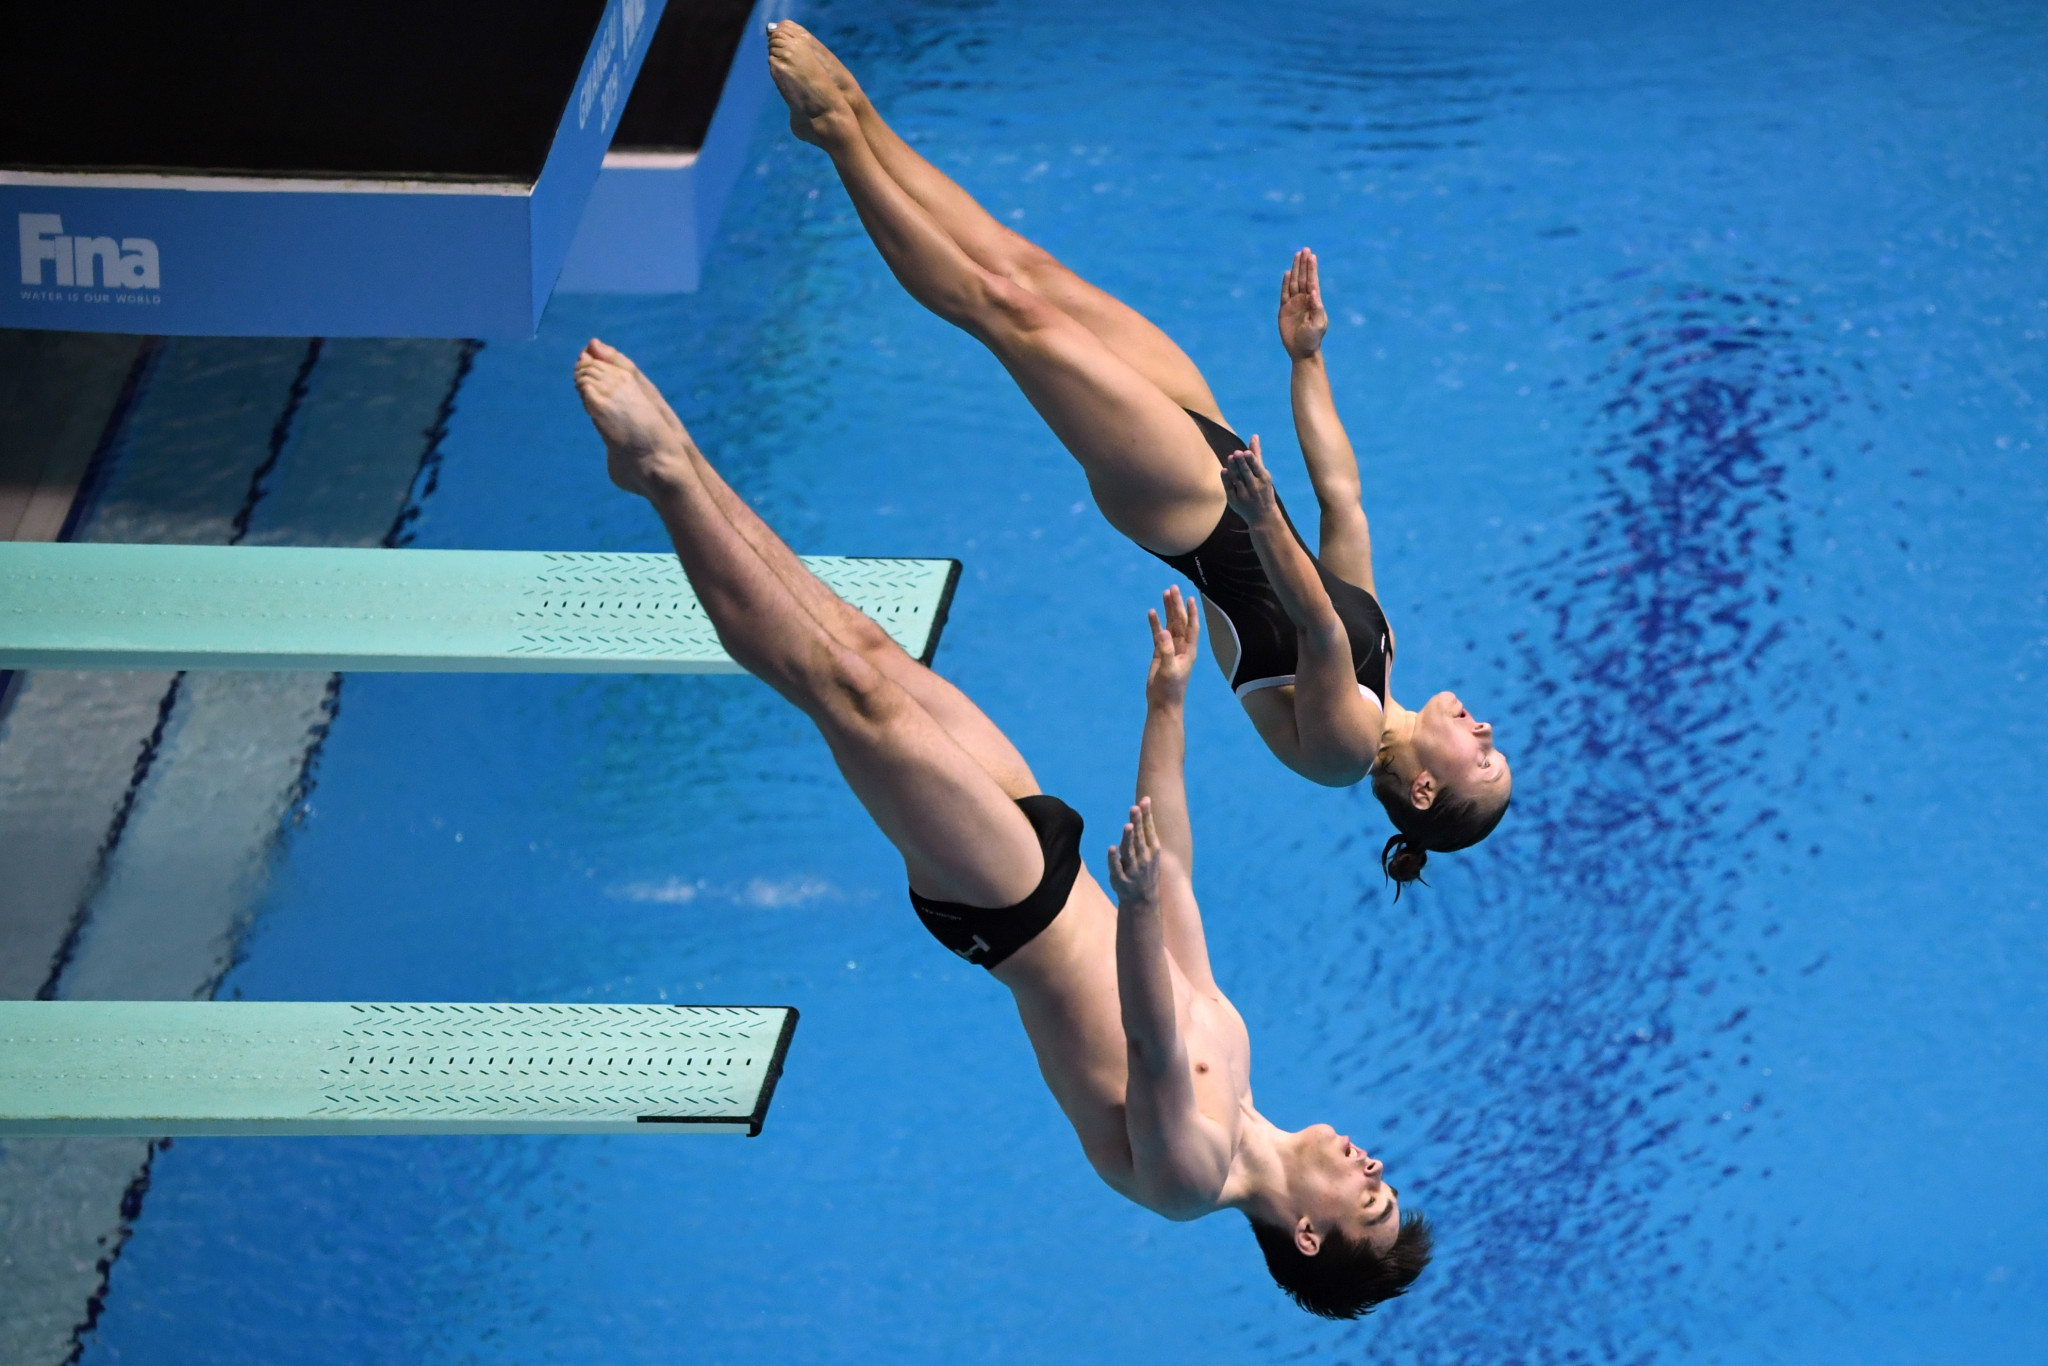 Divers Lou Massenberg and Tina Puzel took bronze medals for Germany at the 2019 World Aquatics Championships in Gwangju ©Getty Images